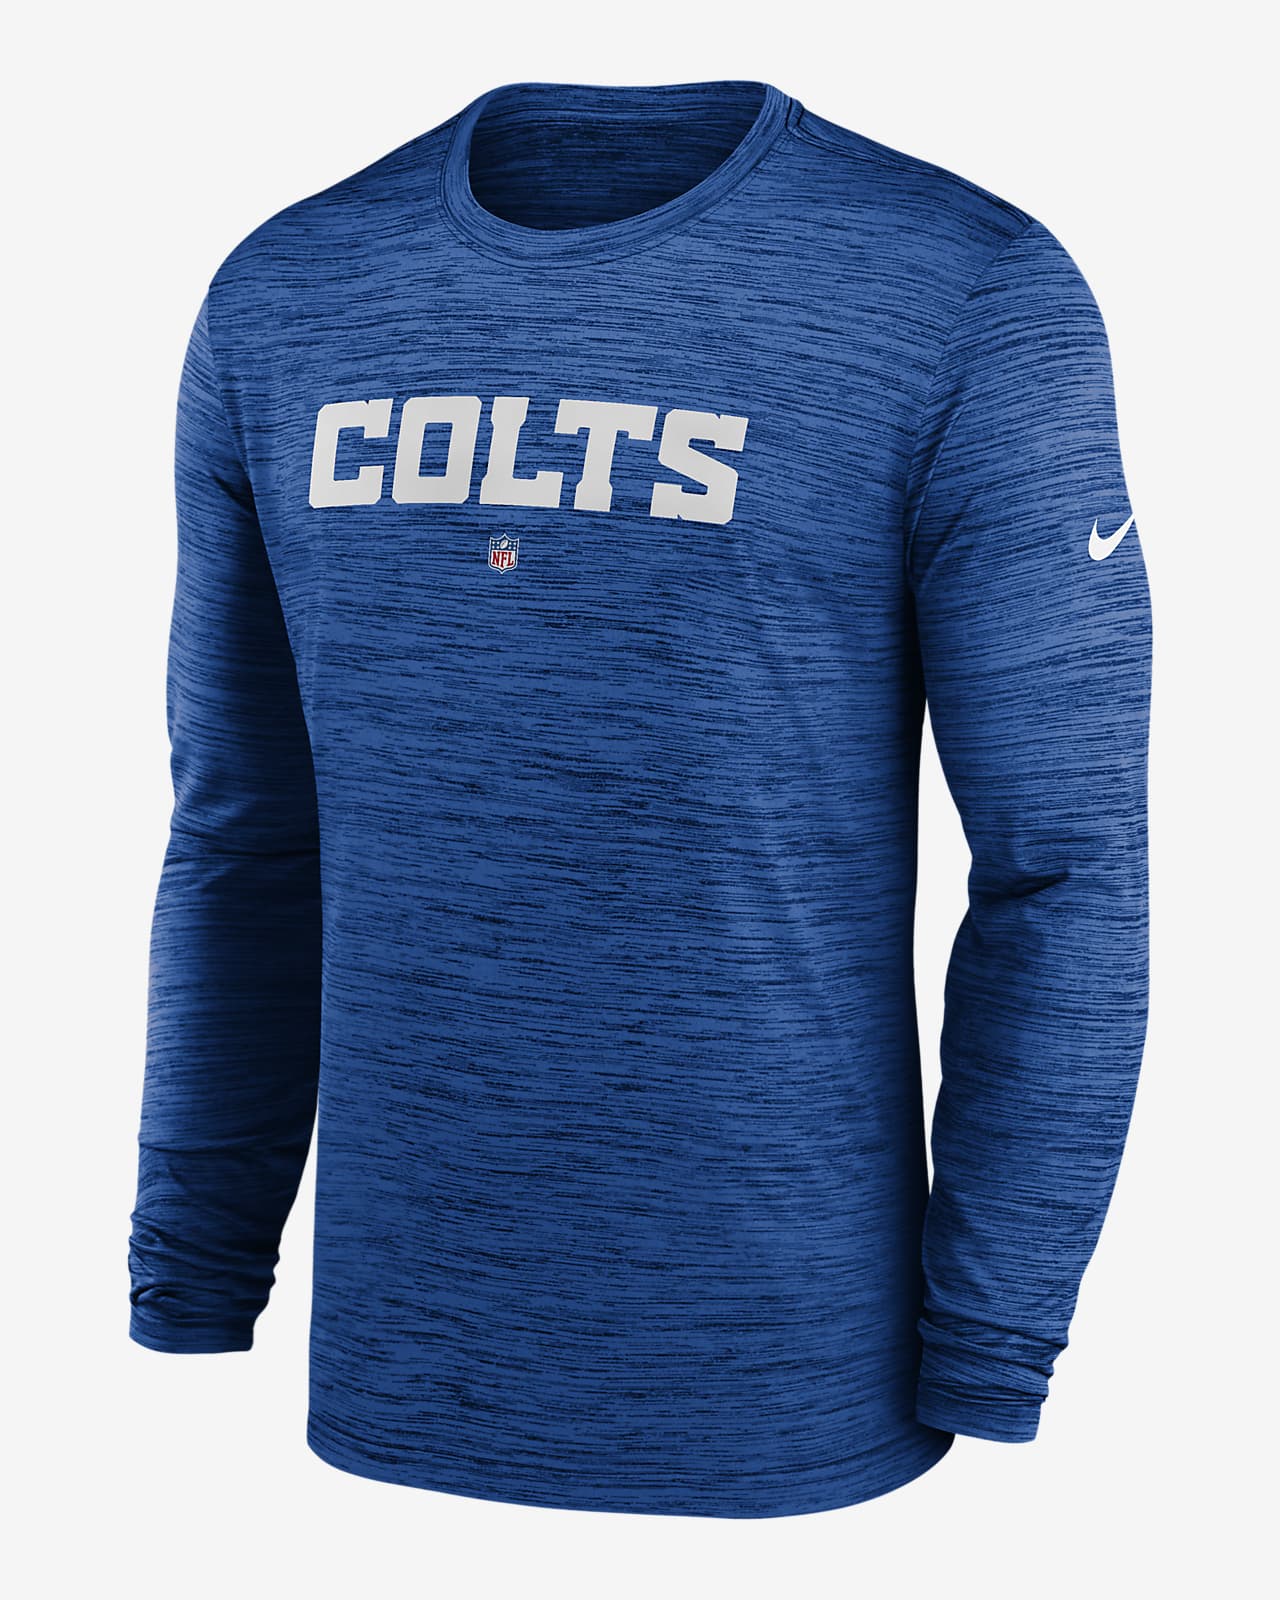 Nike Dri-FIT Sideline Velocity (NFL Indianapolis Colts) Men's Long